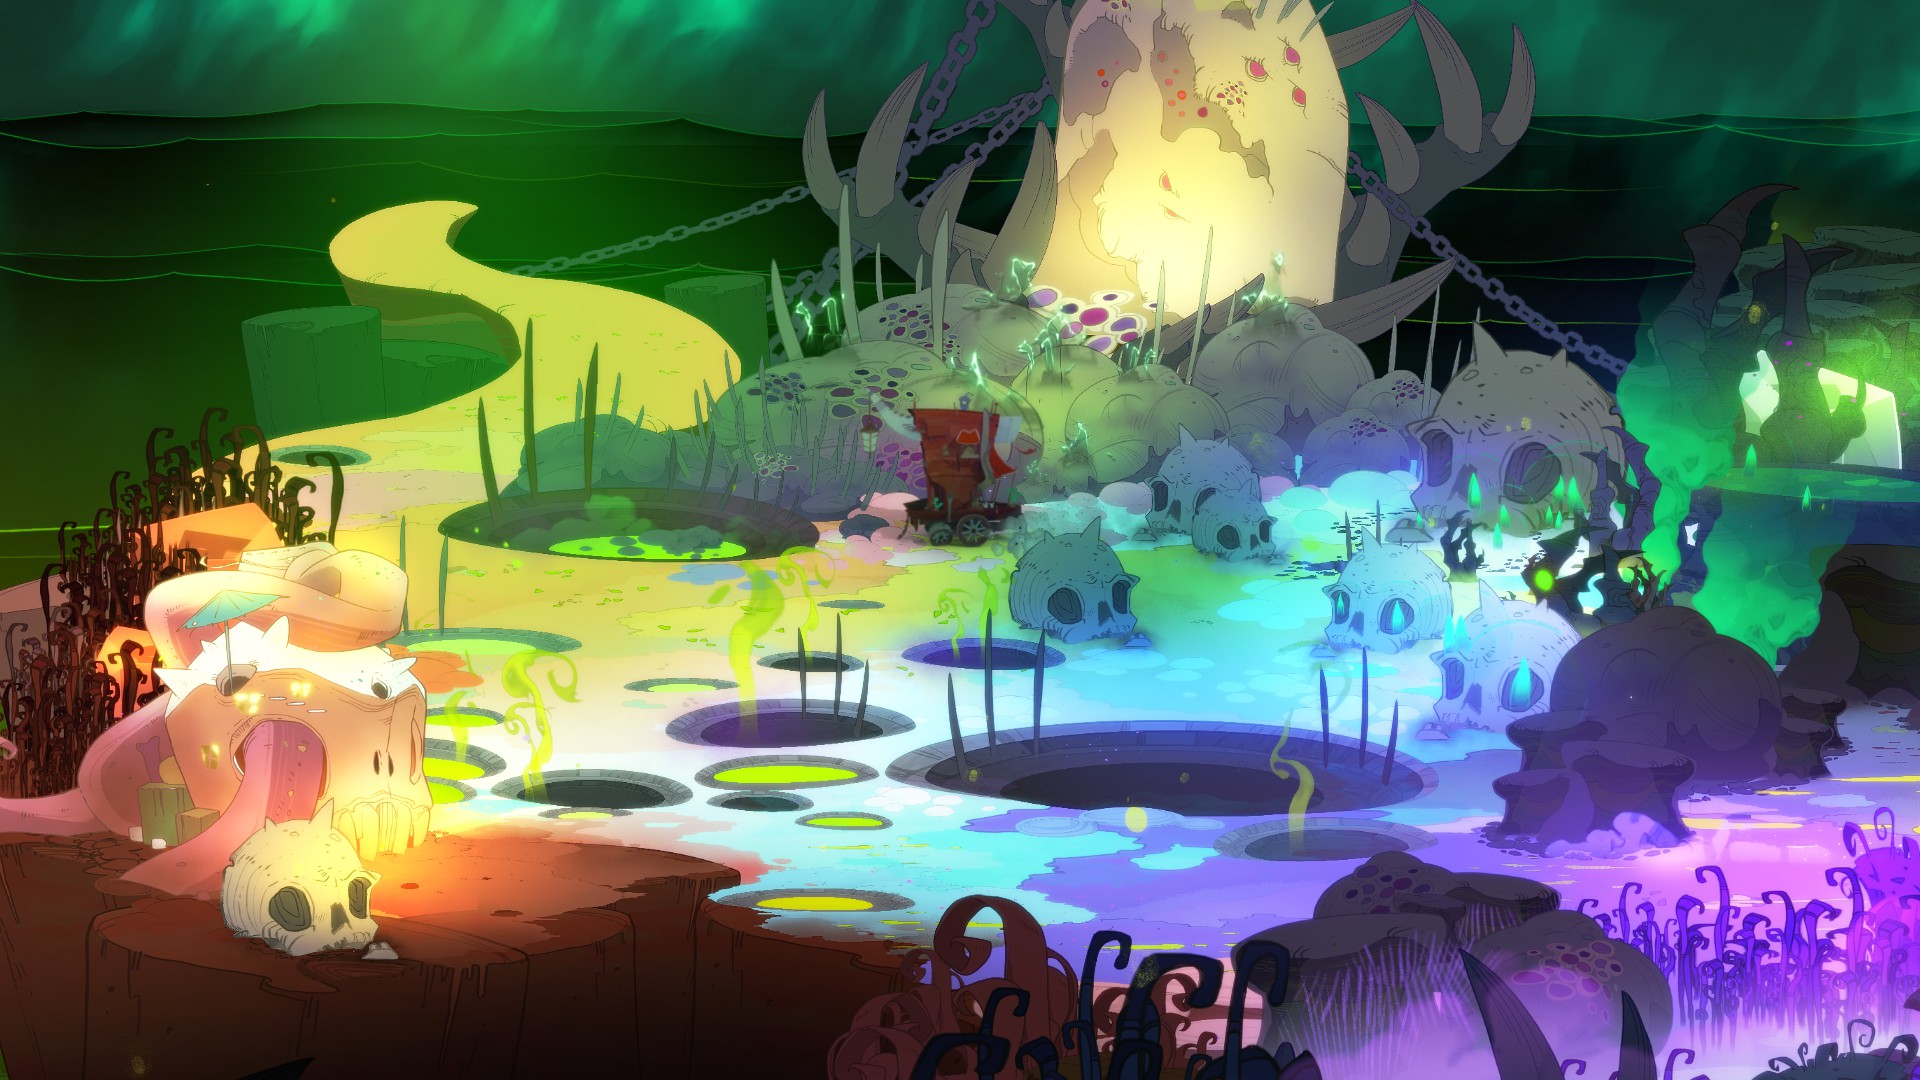 pyre supergiant switch download